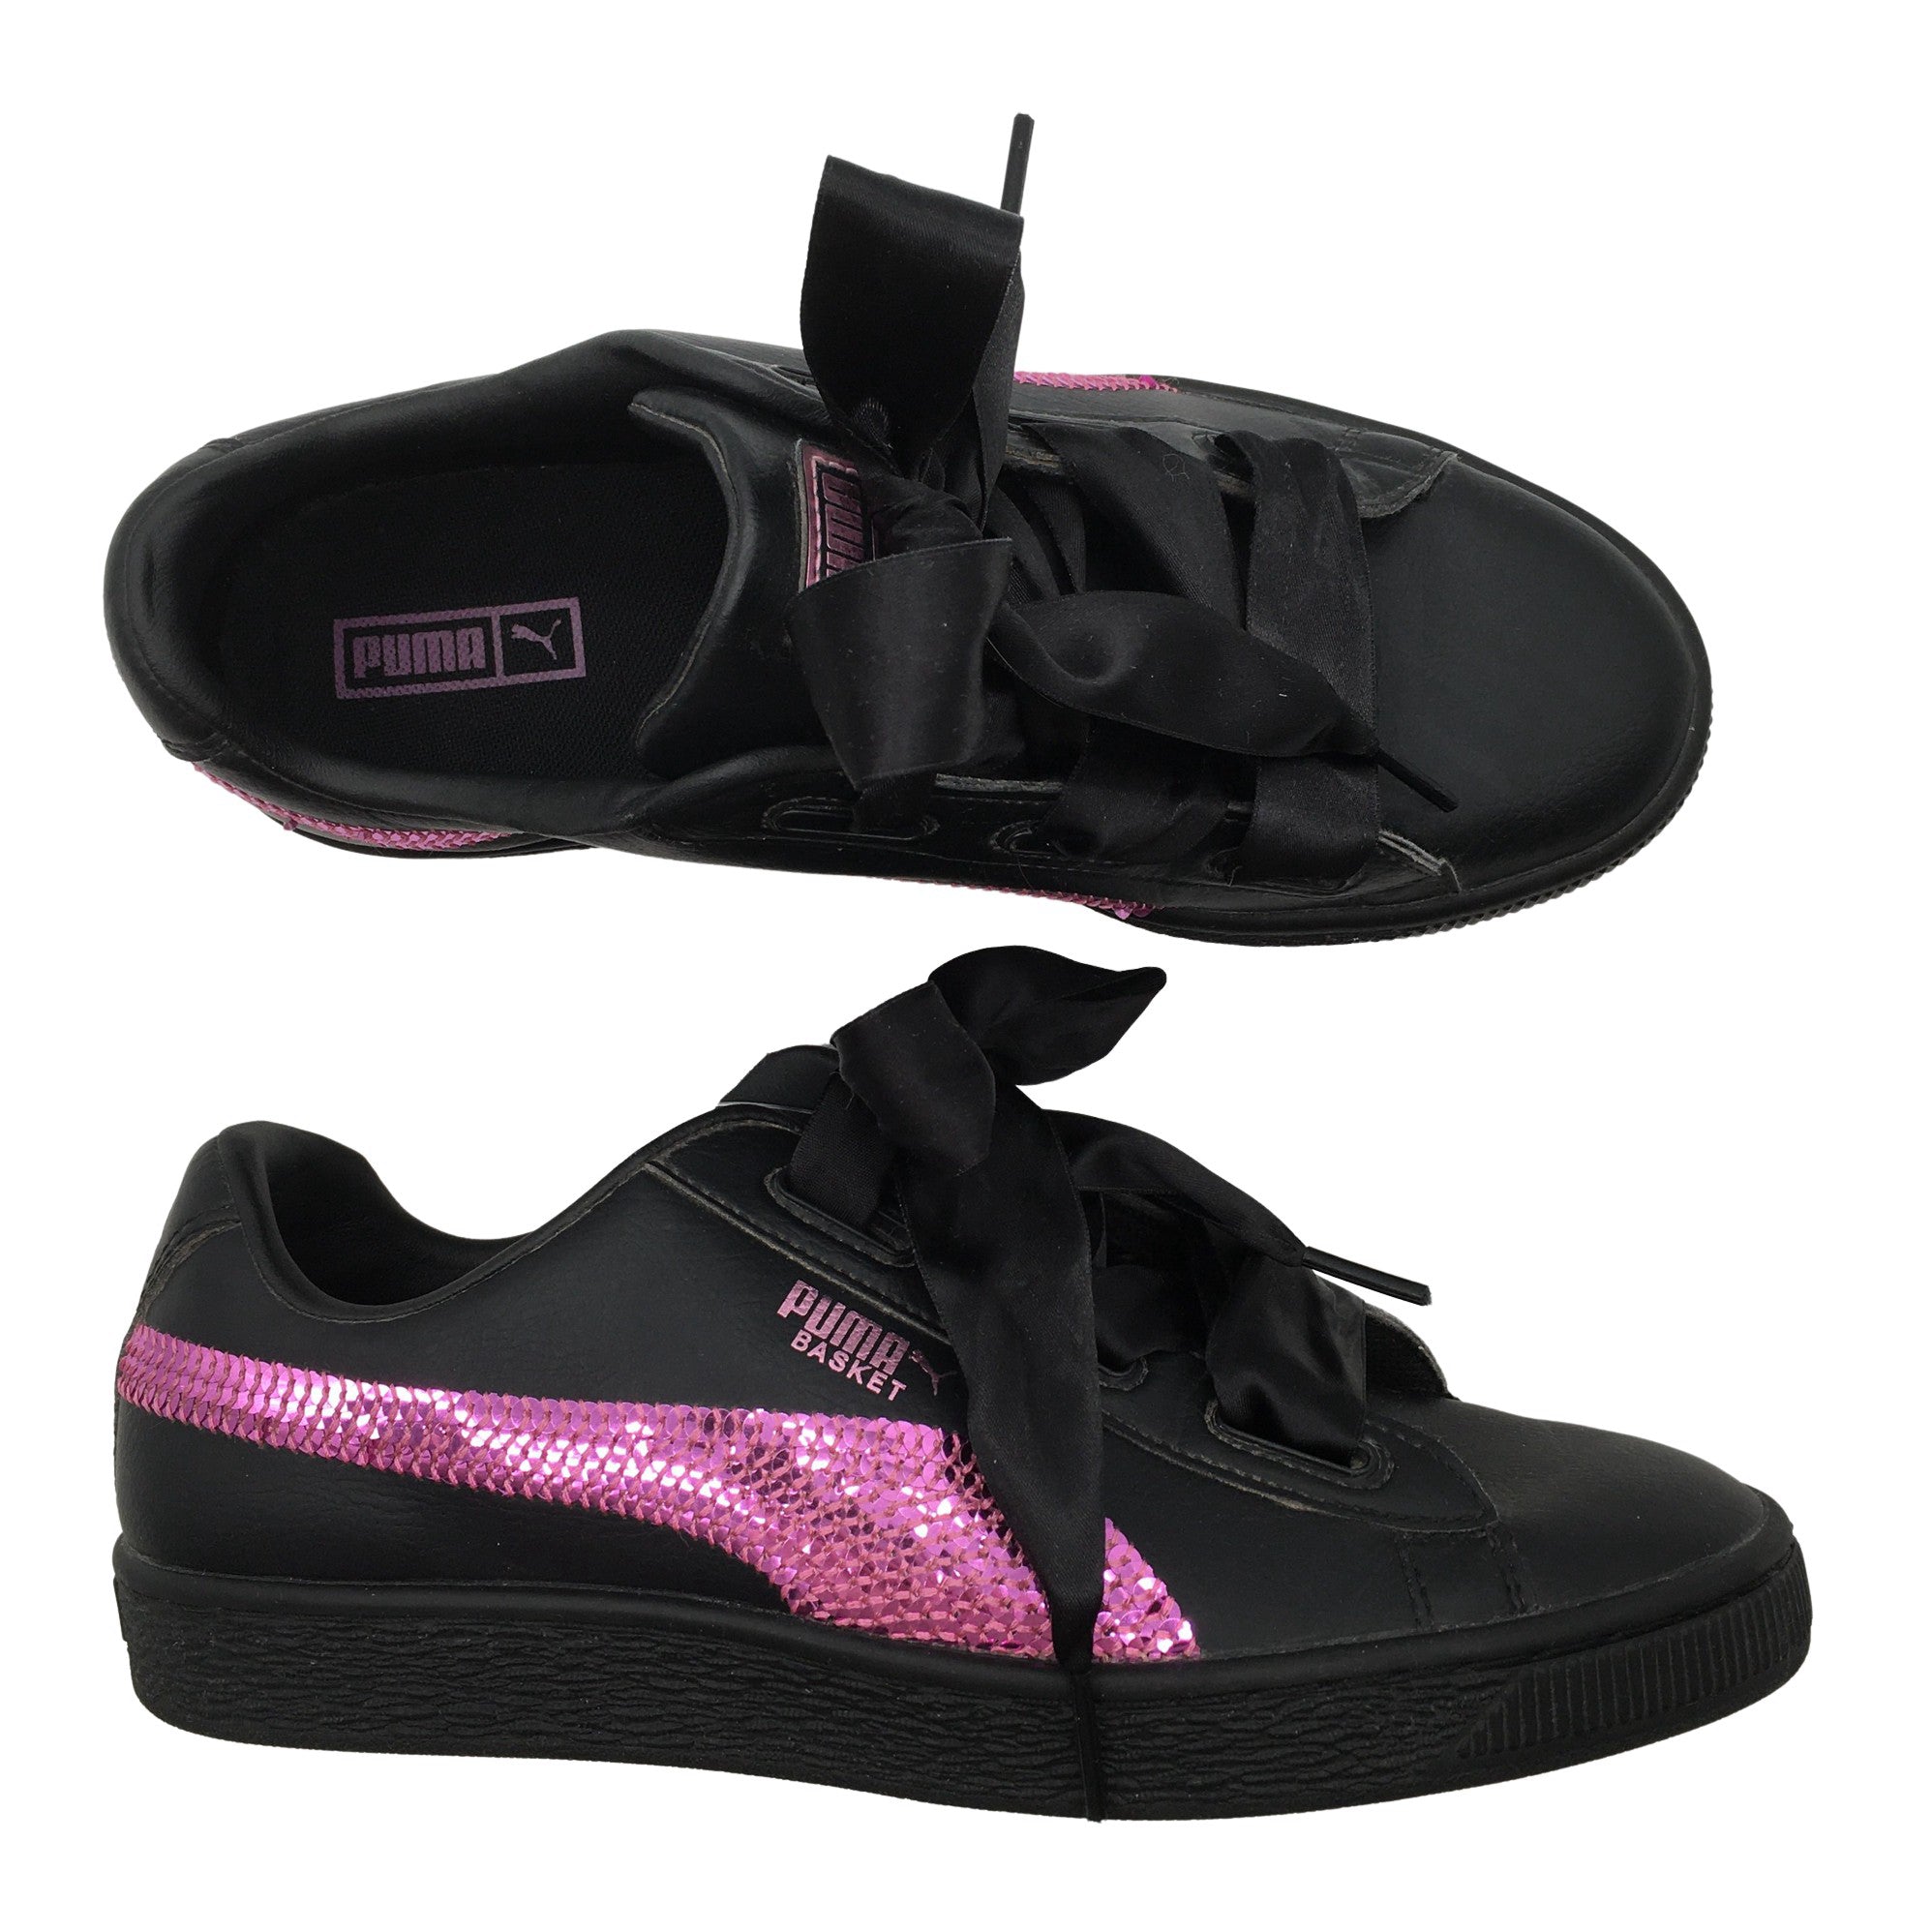 Puma Casual sneakers, size 38 (Black) Emmy